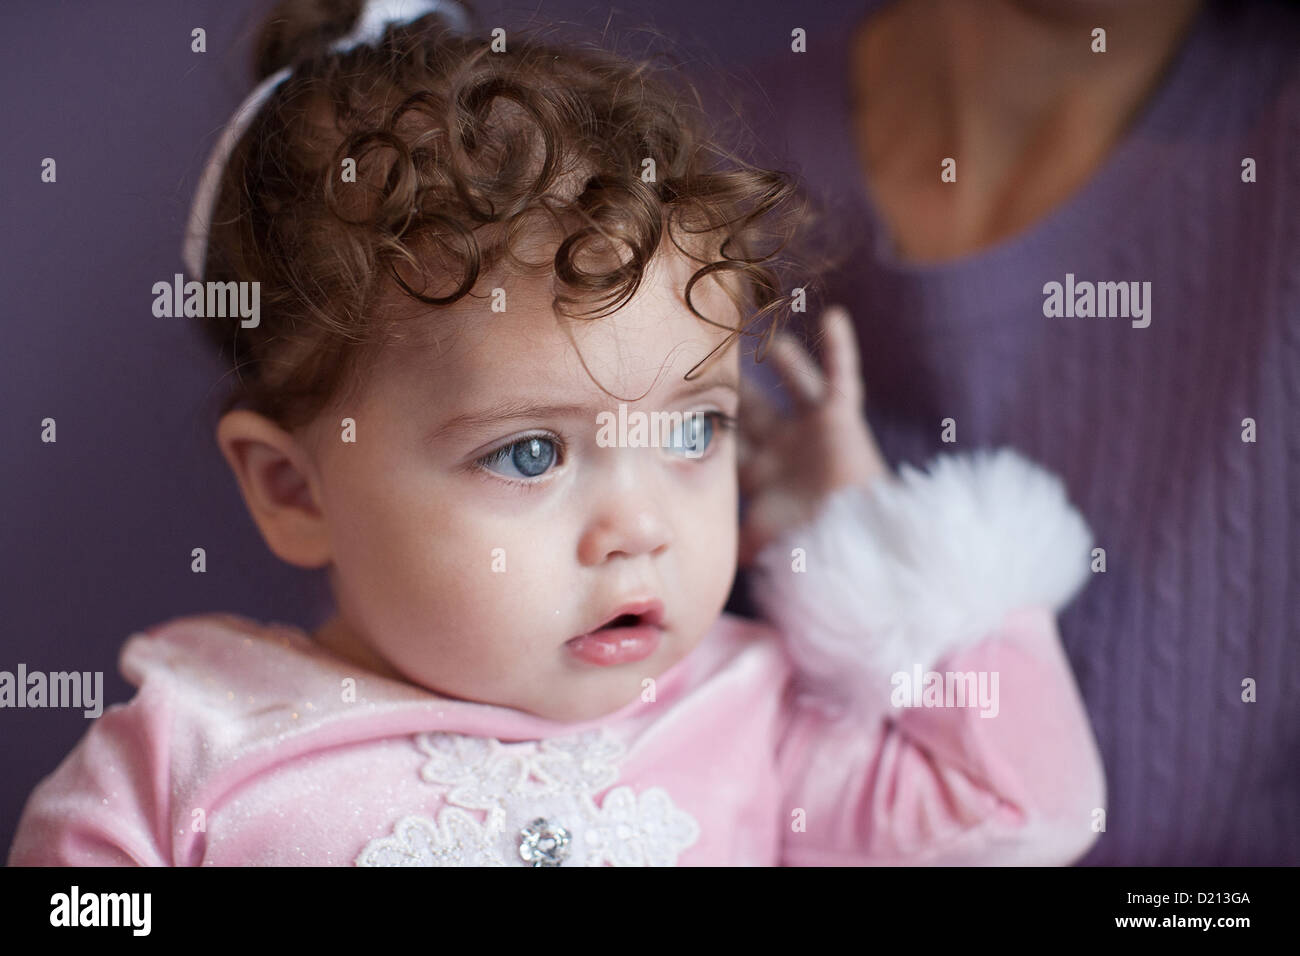 Beautiful one year old girl with bright blue eyes and curly brown hair  looking out a window Stock Photo - Alamy